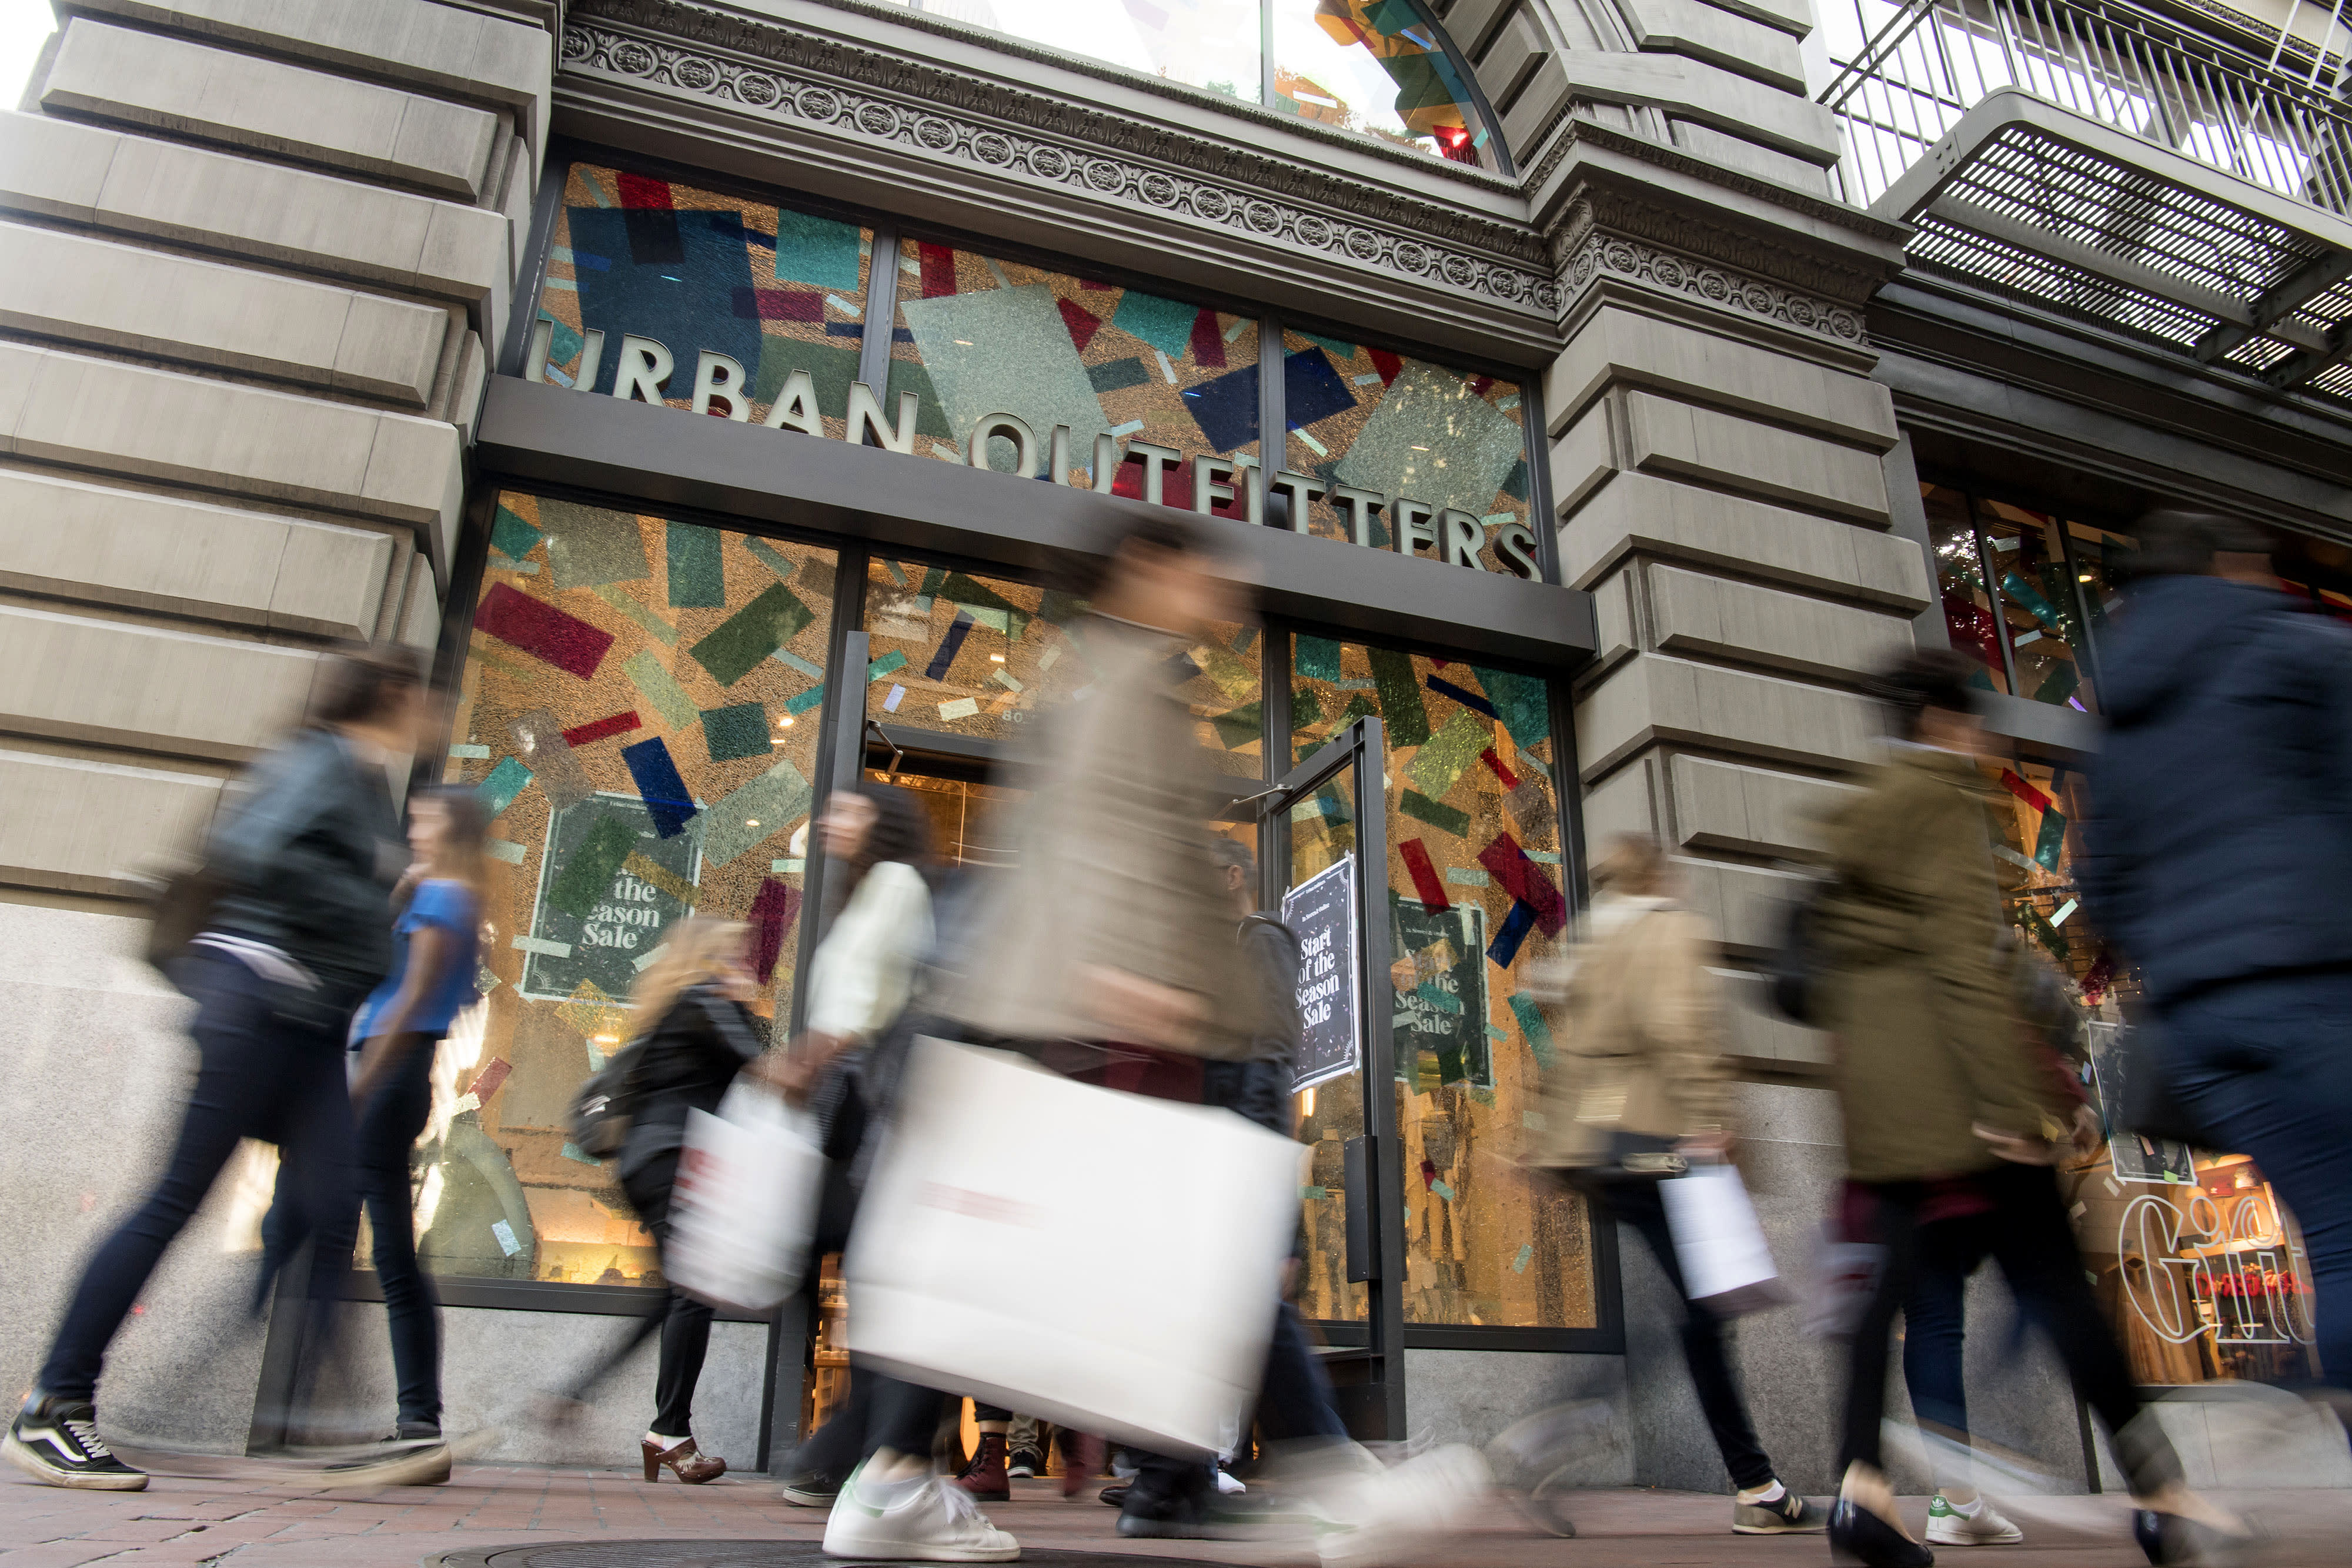 Urban Outfitters, KB Home, Repay Holdings and more